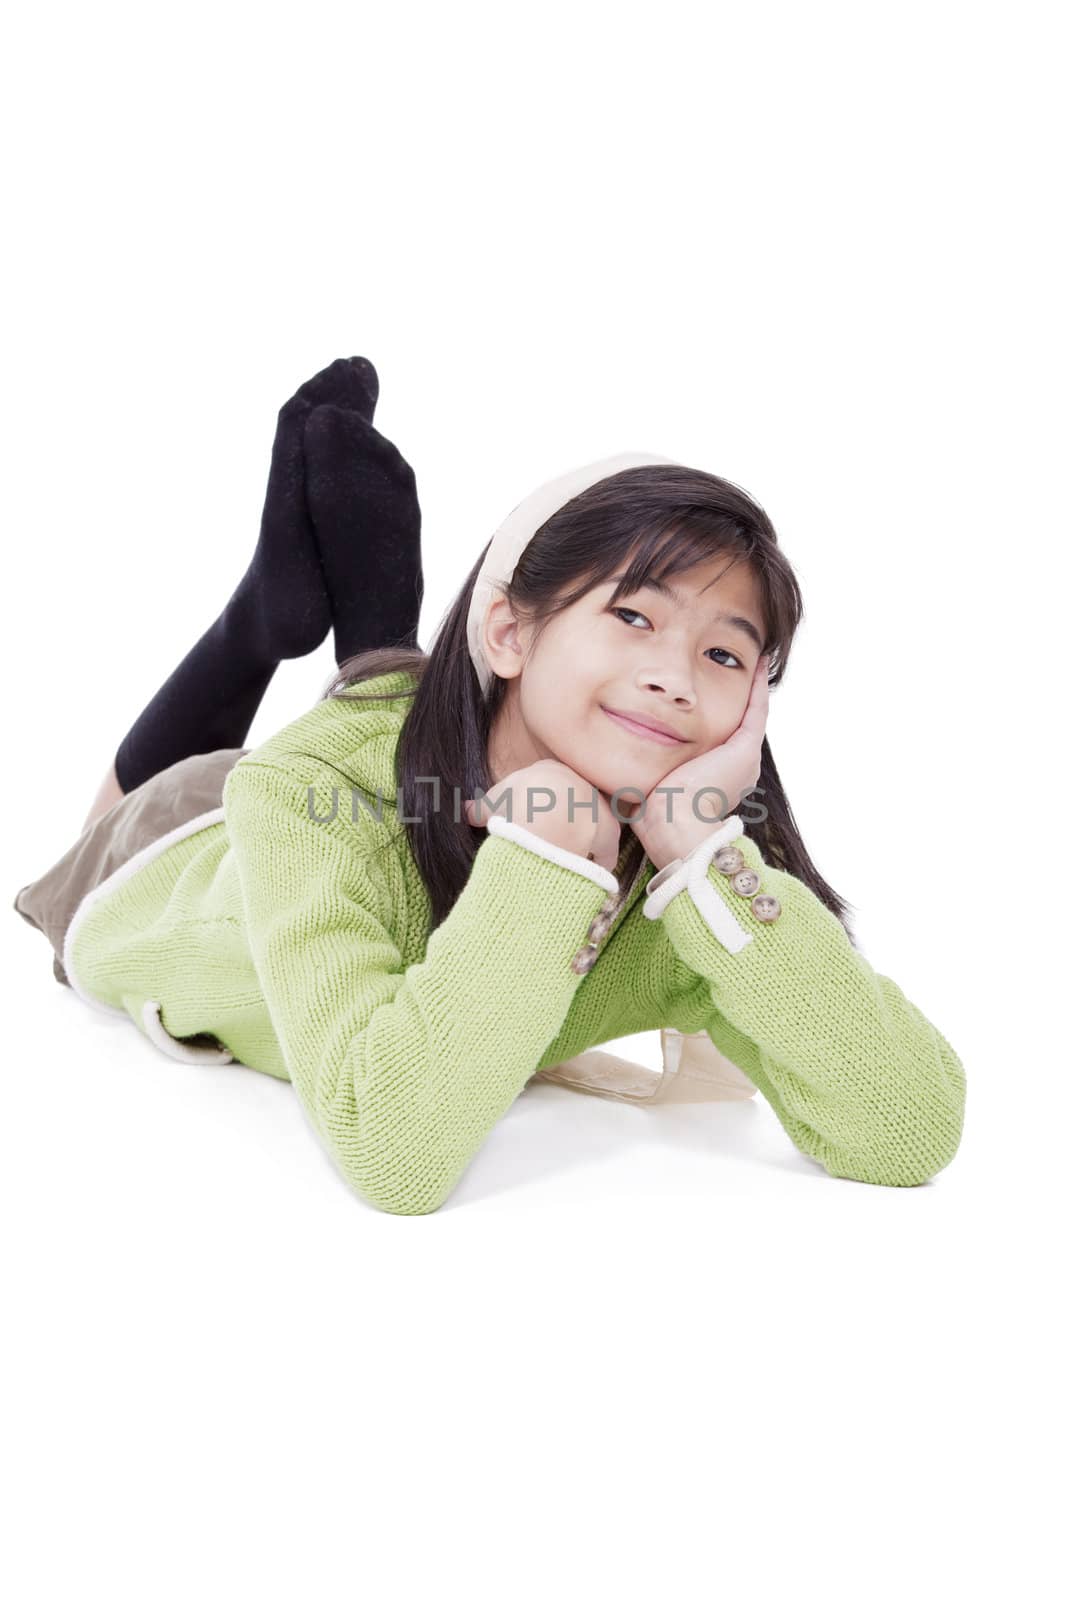 Eleven year old girl lying on floor relaxing by jarenwicklund